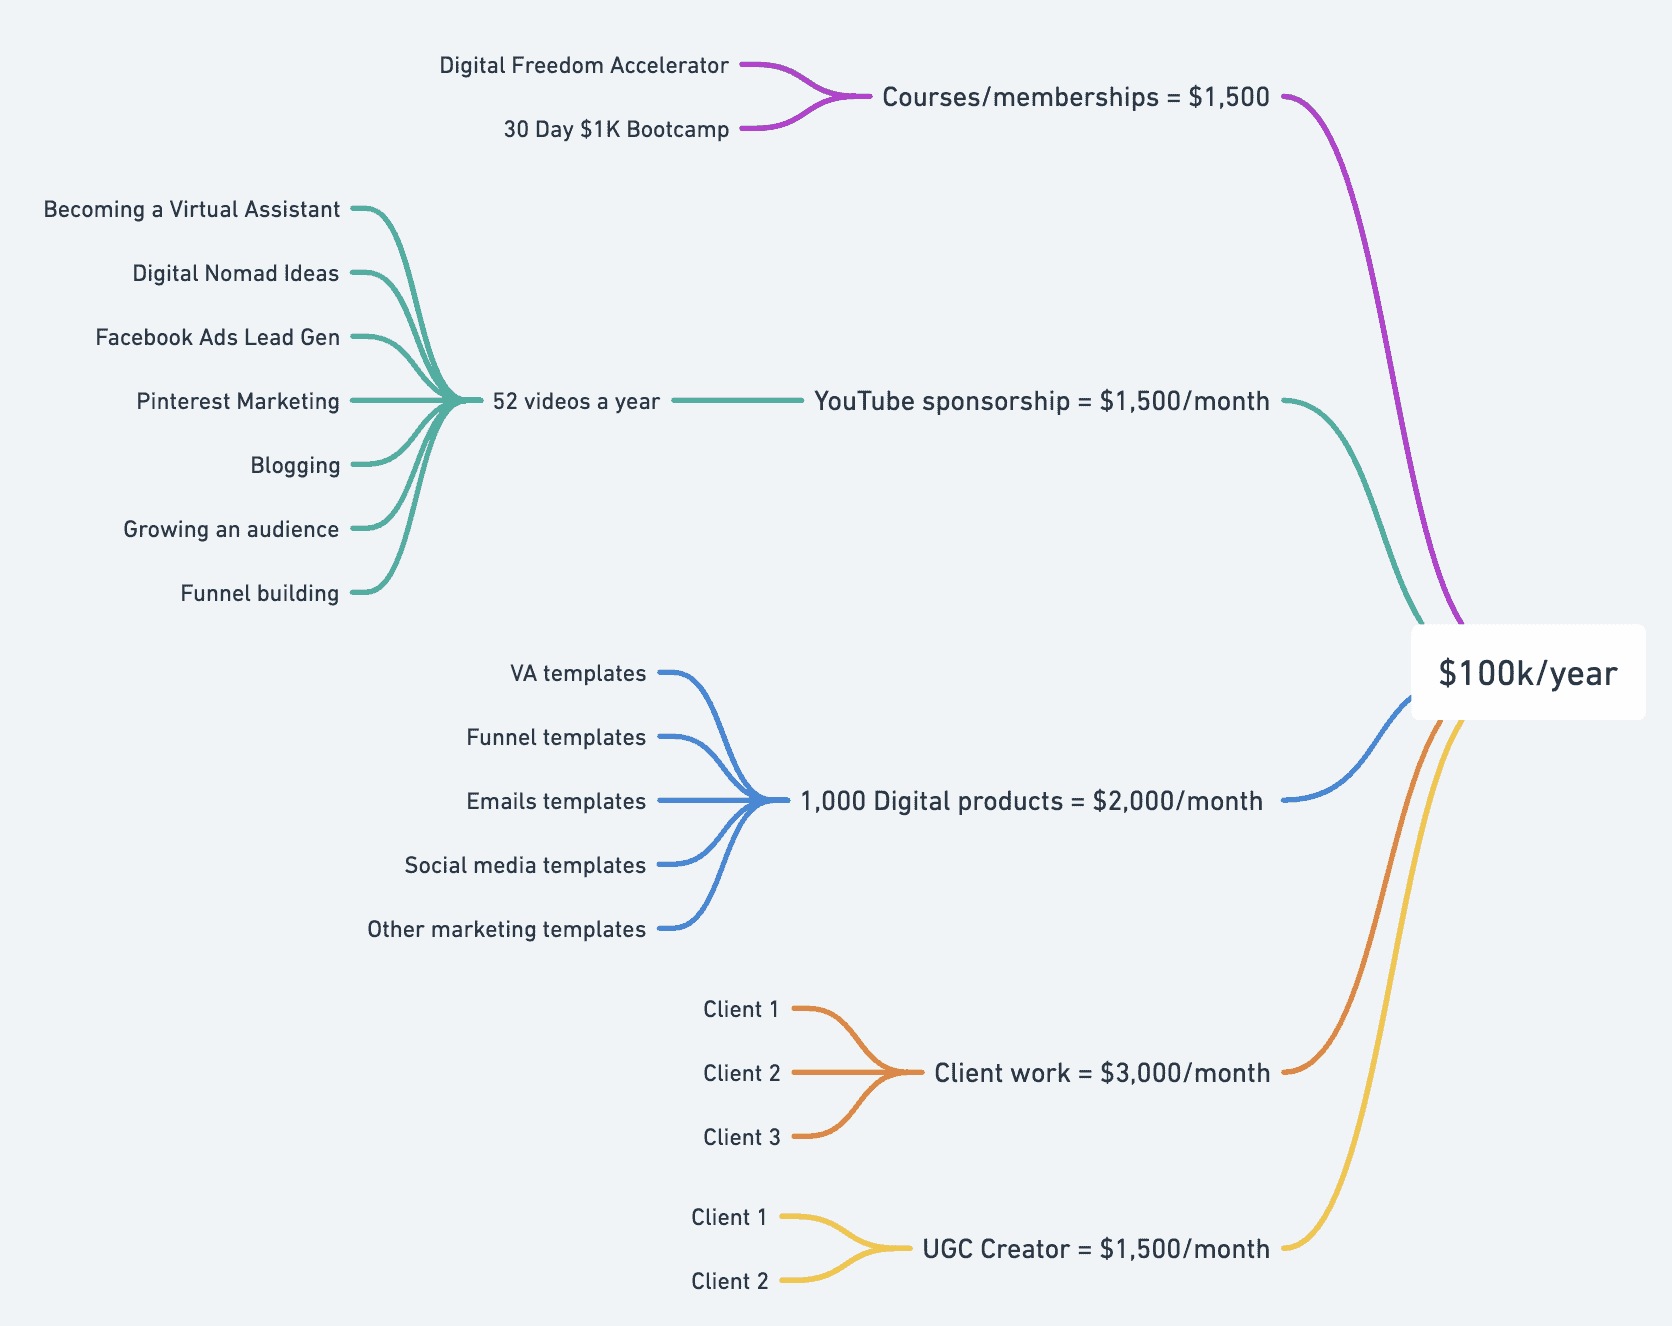 screenshot of my mind map of how to get to $100K a year